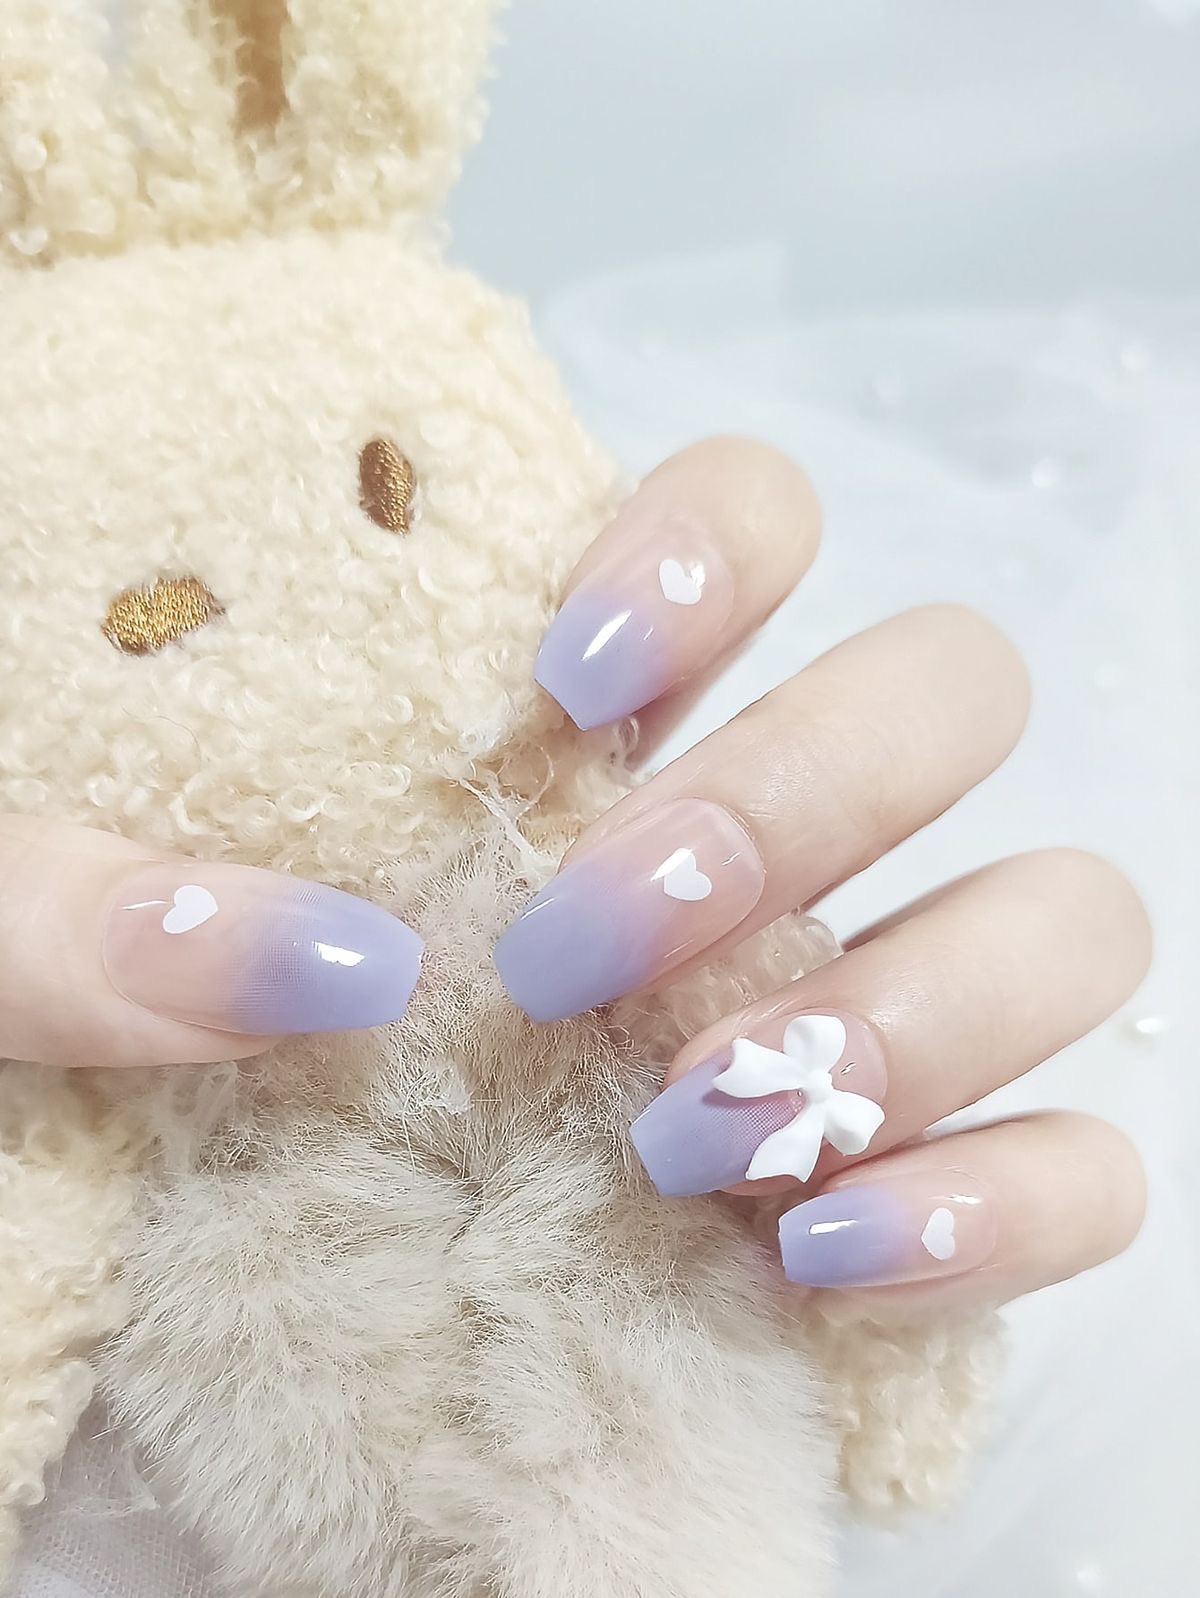 Buy Press on Nails in Lilac Hearts Acrylic Nails Kawaii Nails False Nails  Luxury Nails Nails in This Image Are Medium Almond Online in India - Etsy